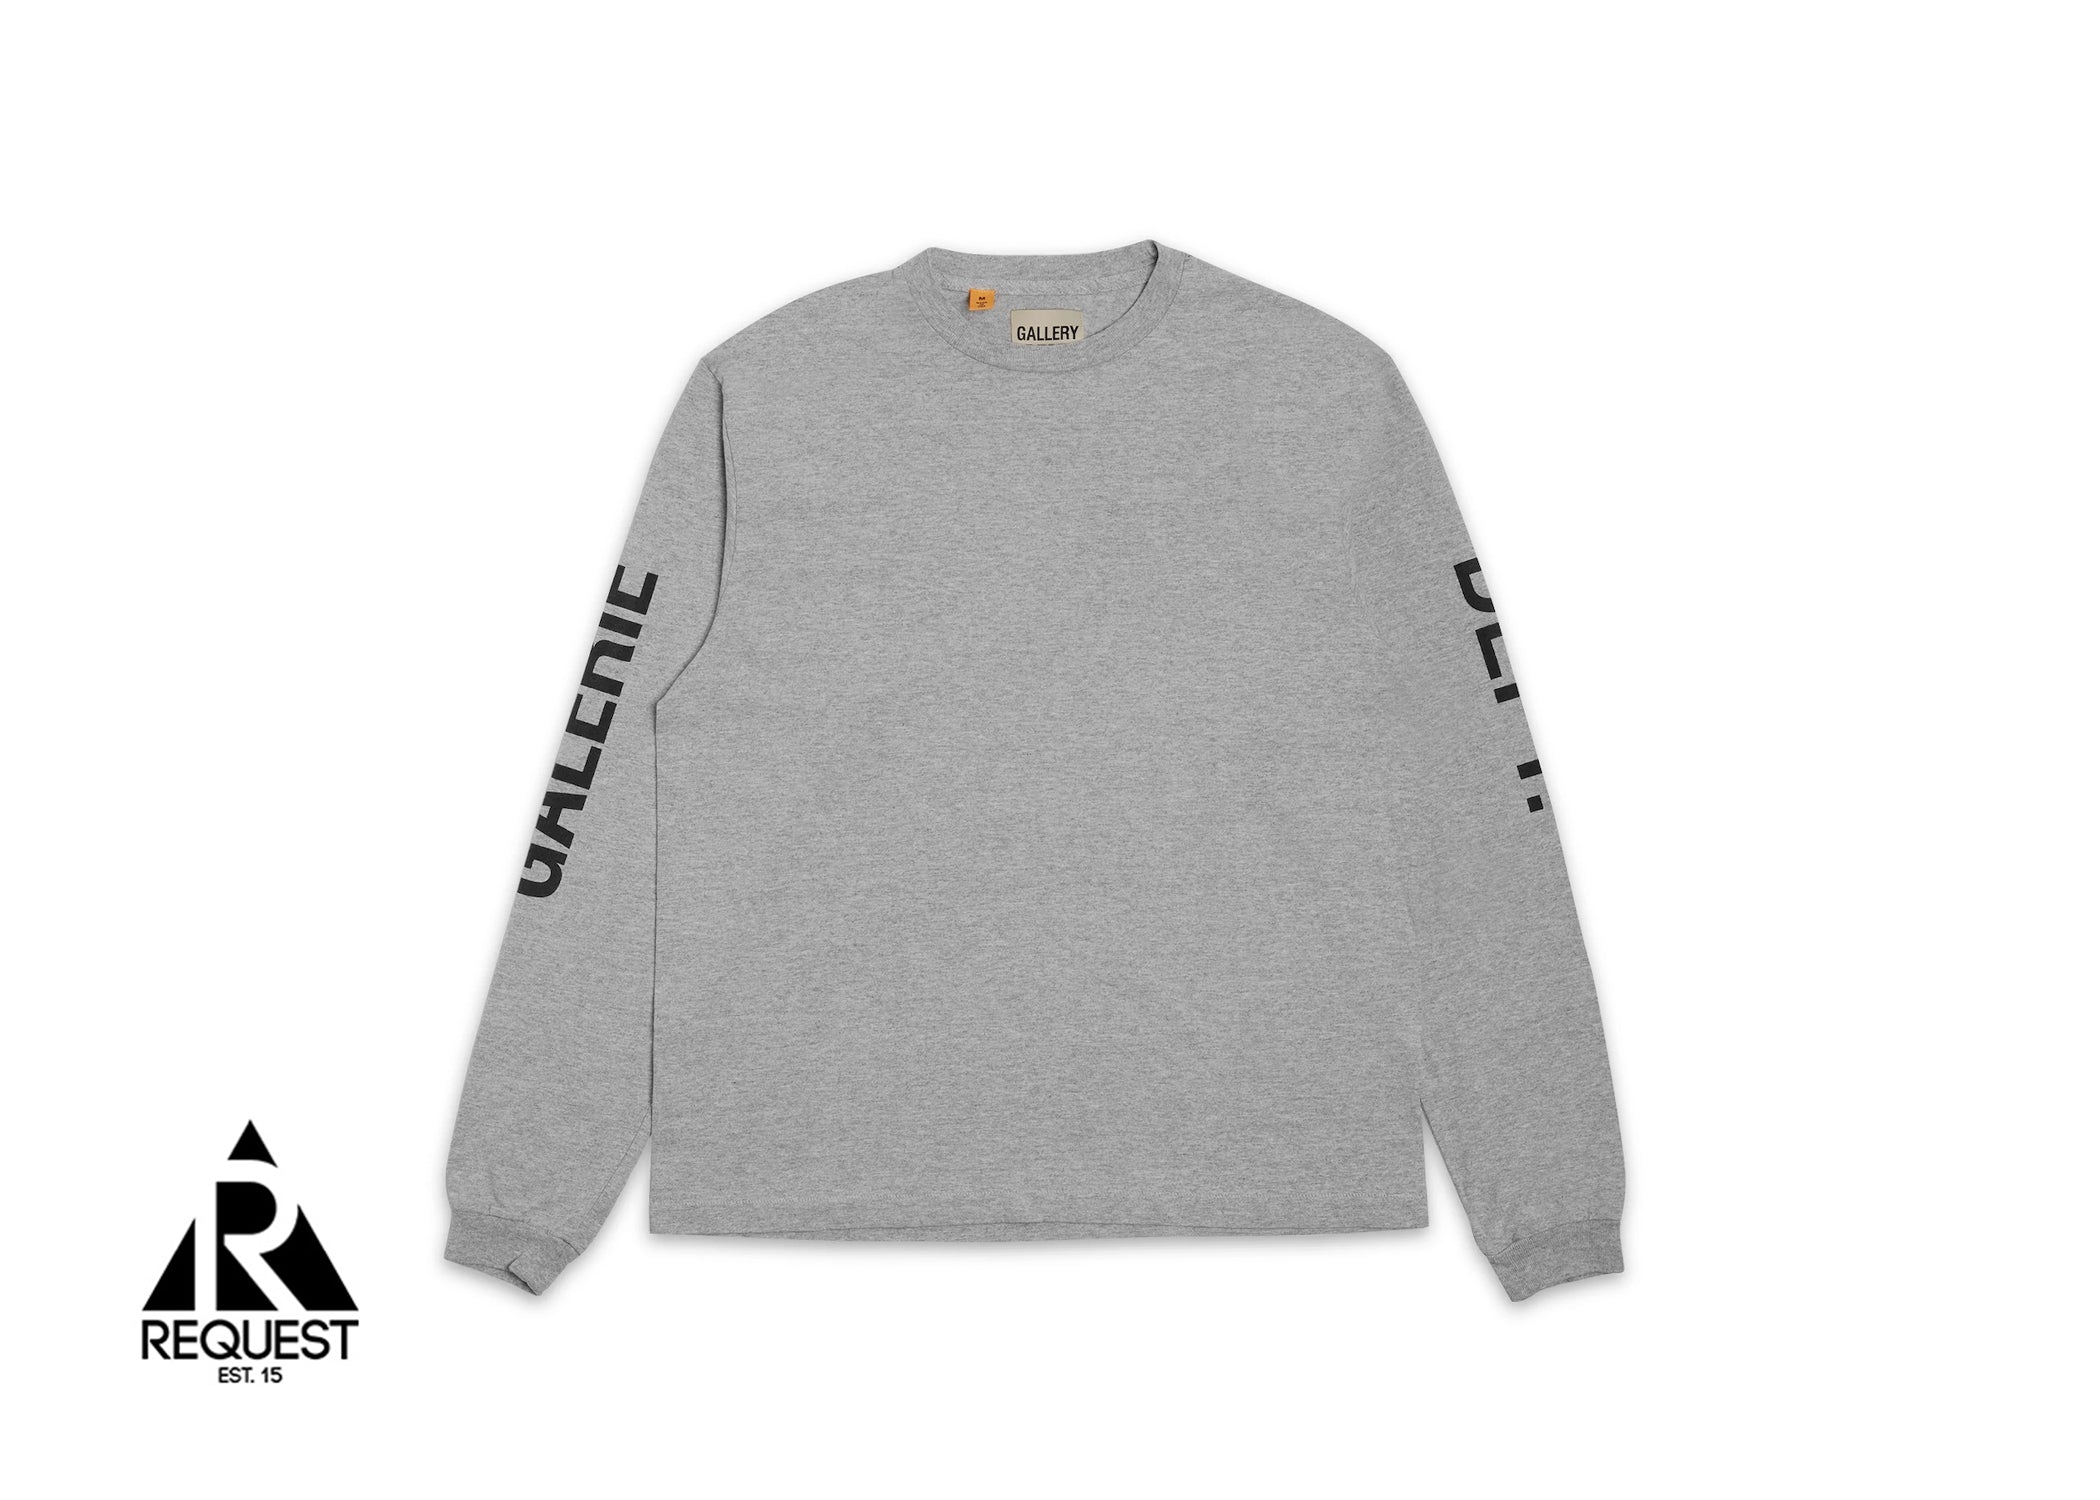 Gallery Dept. French Collector L/S Tee "Grey"